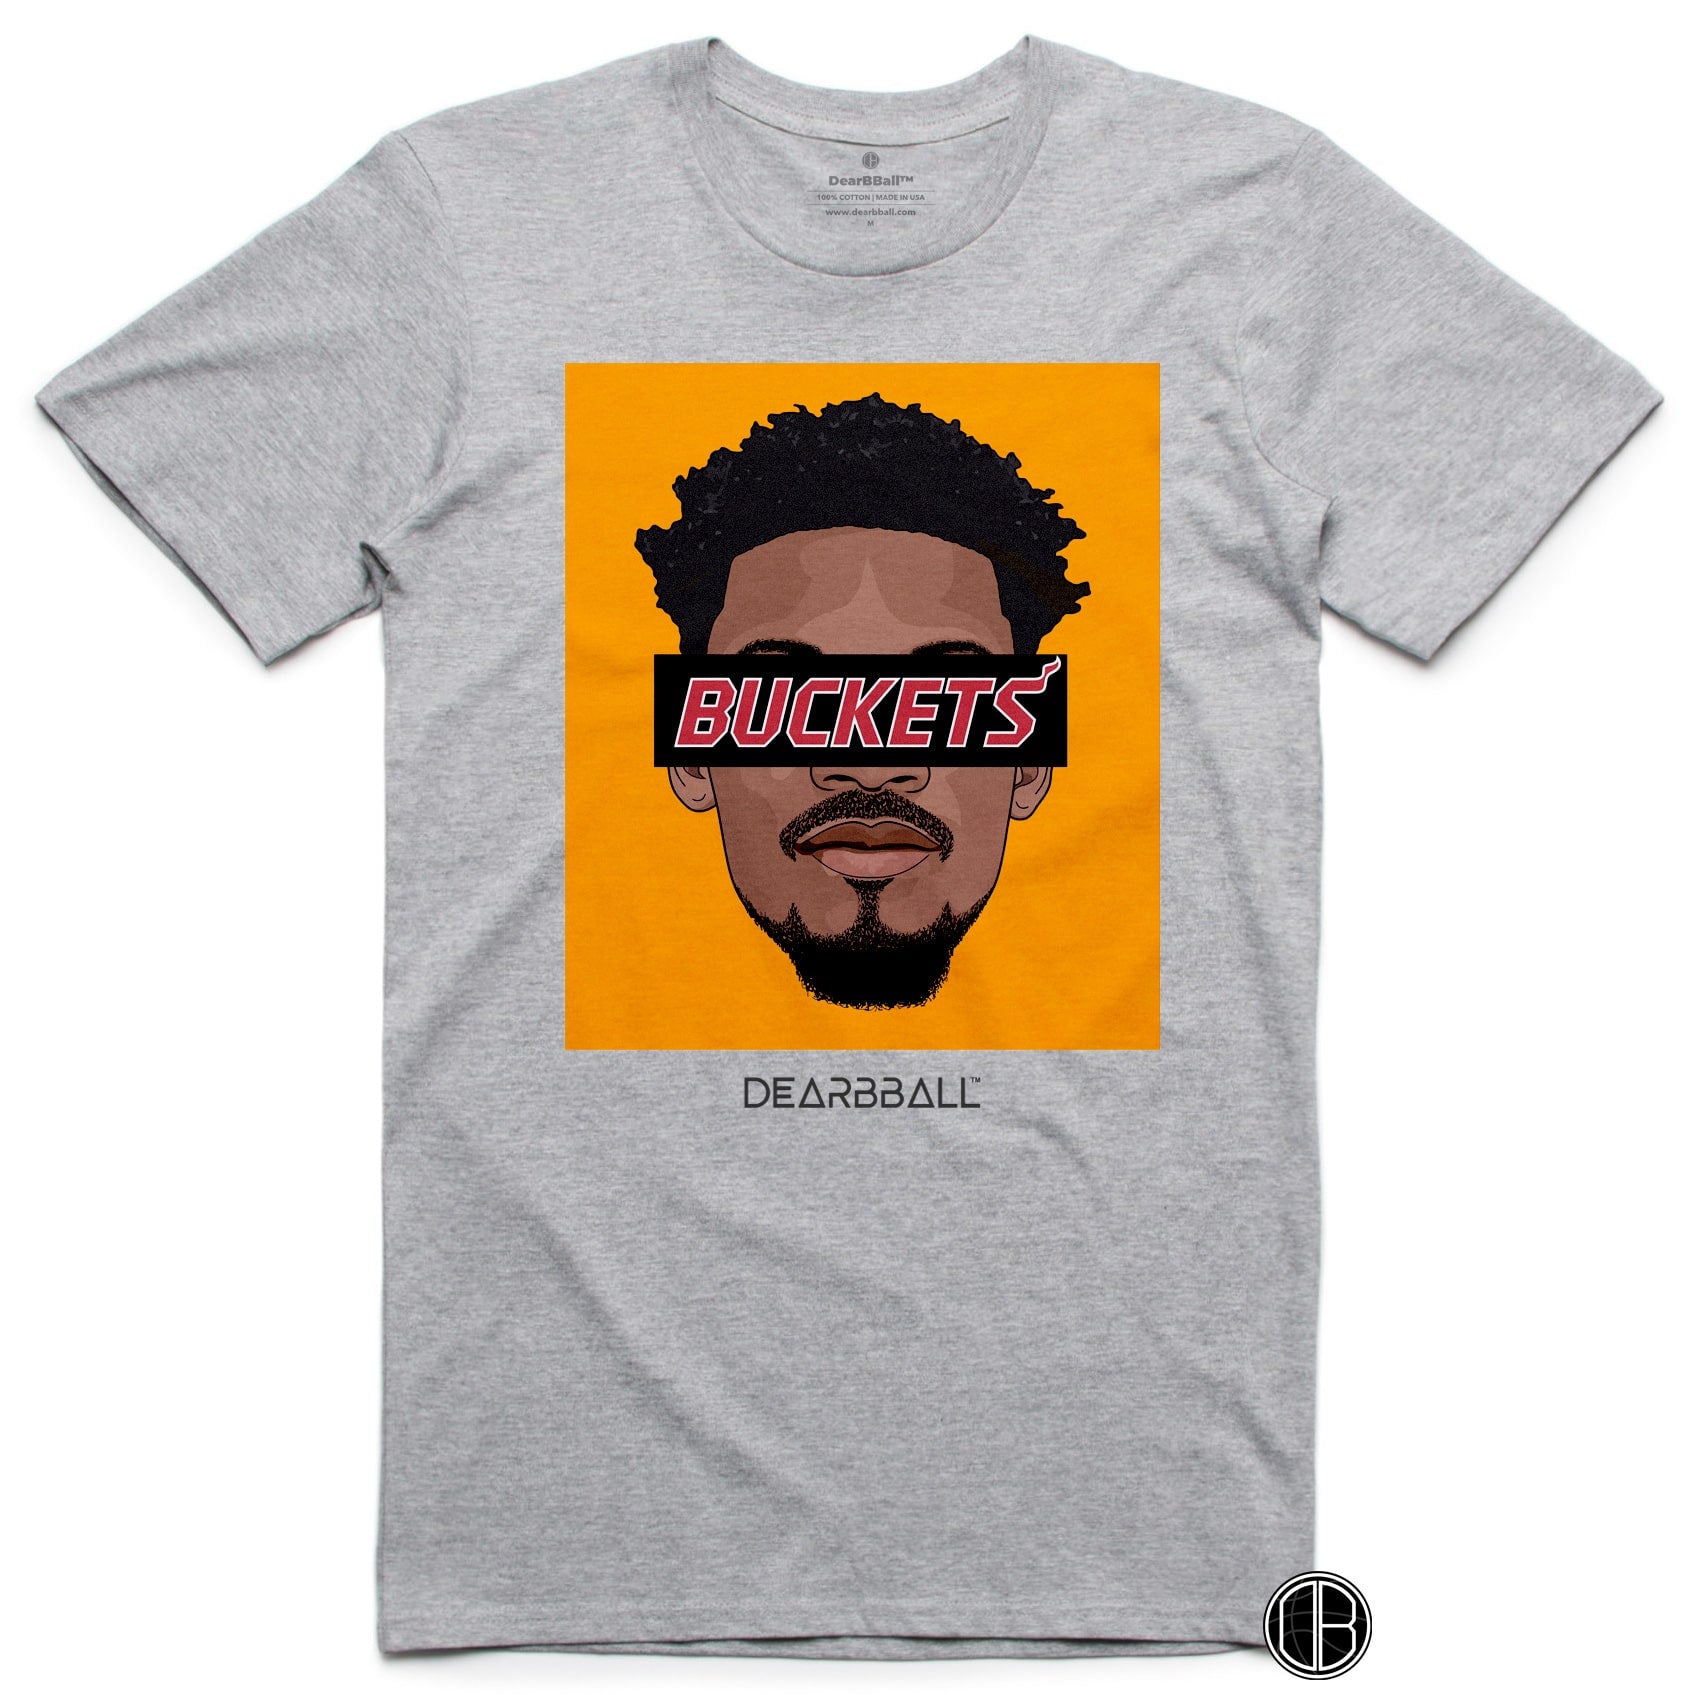 DearBBall T-Shirt - BUCKETS Miami Colors Edition